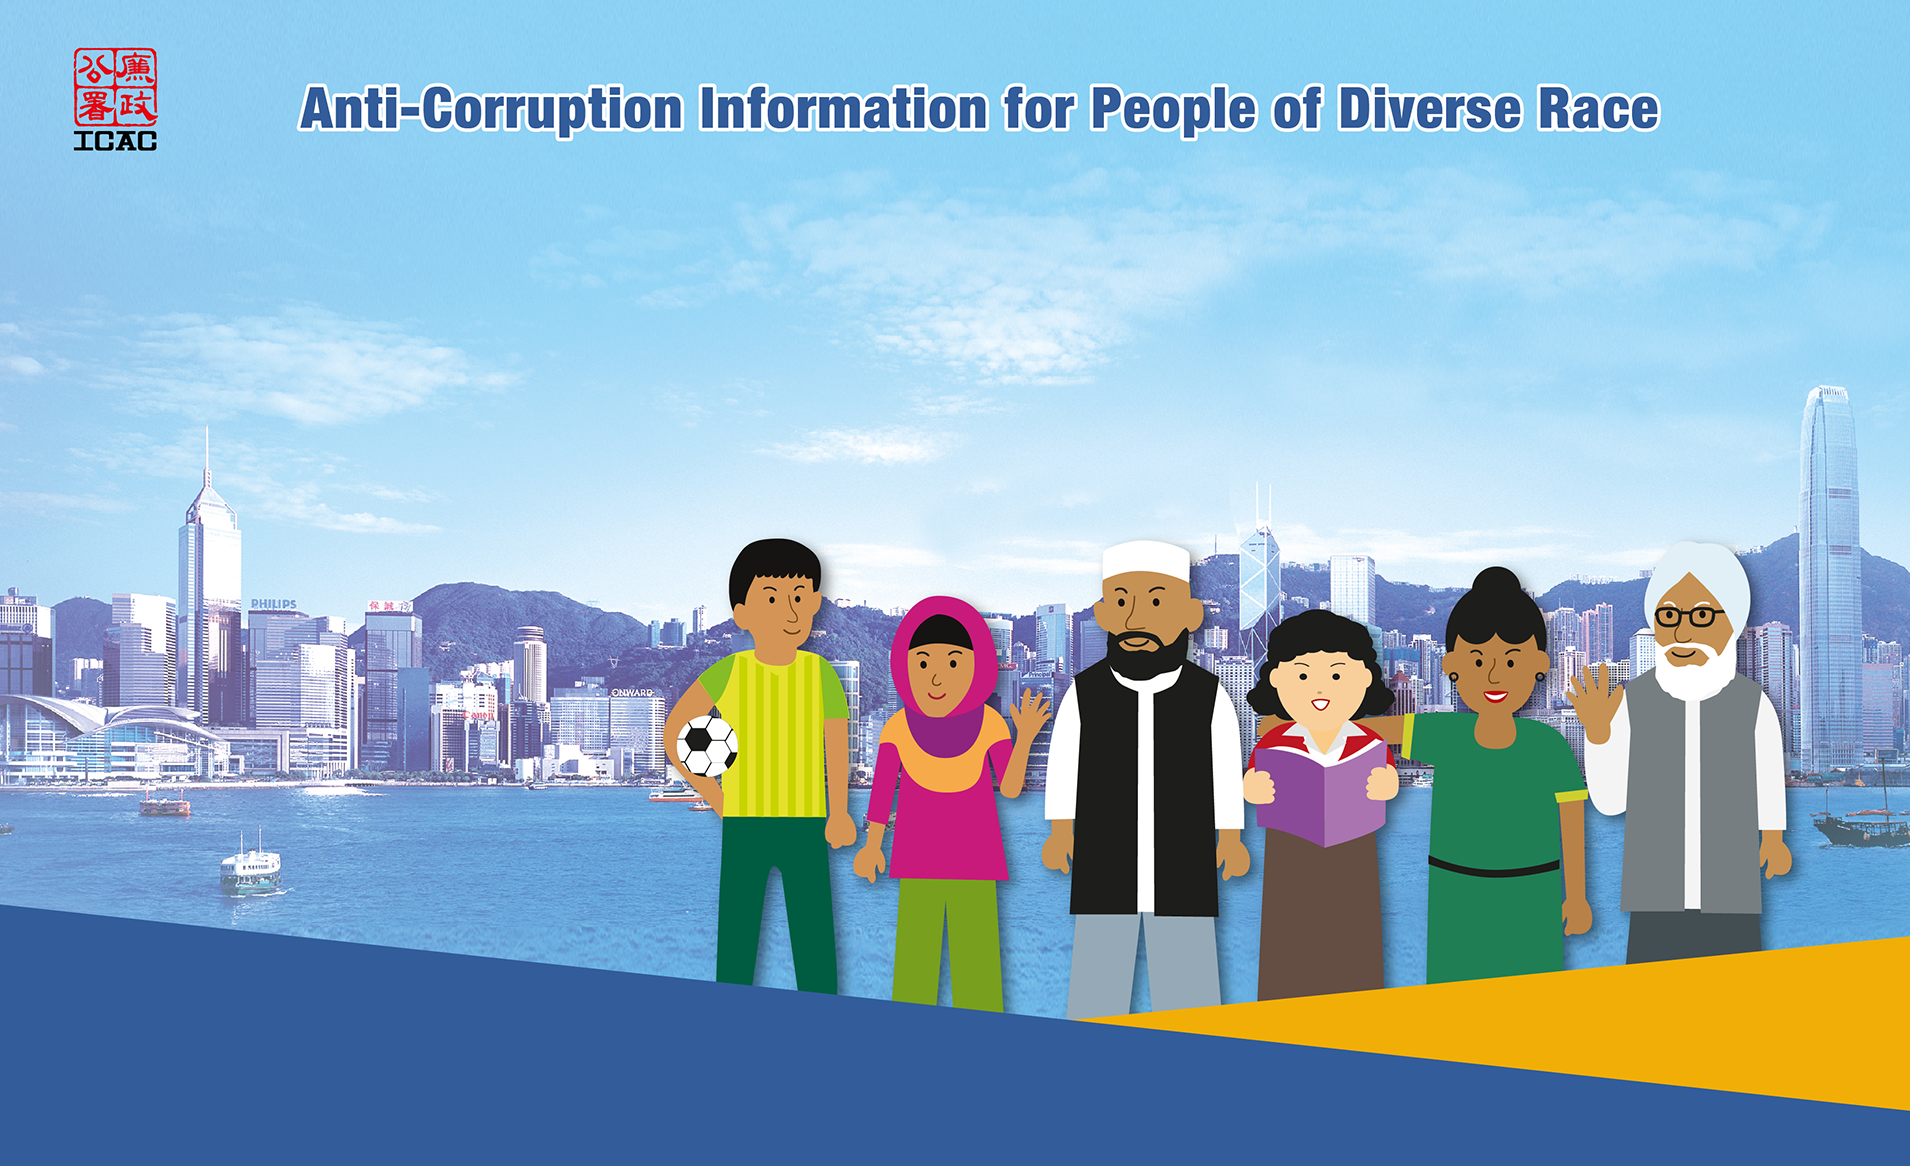 Anti-Corruption Information for People of Diverse Race